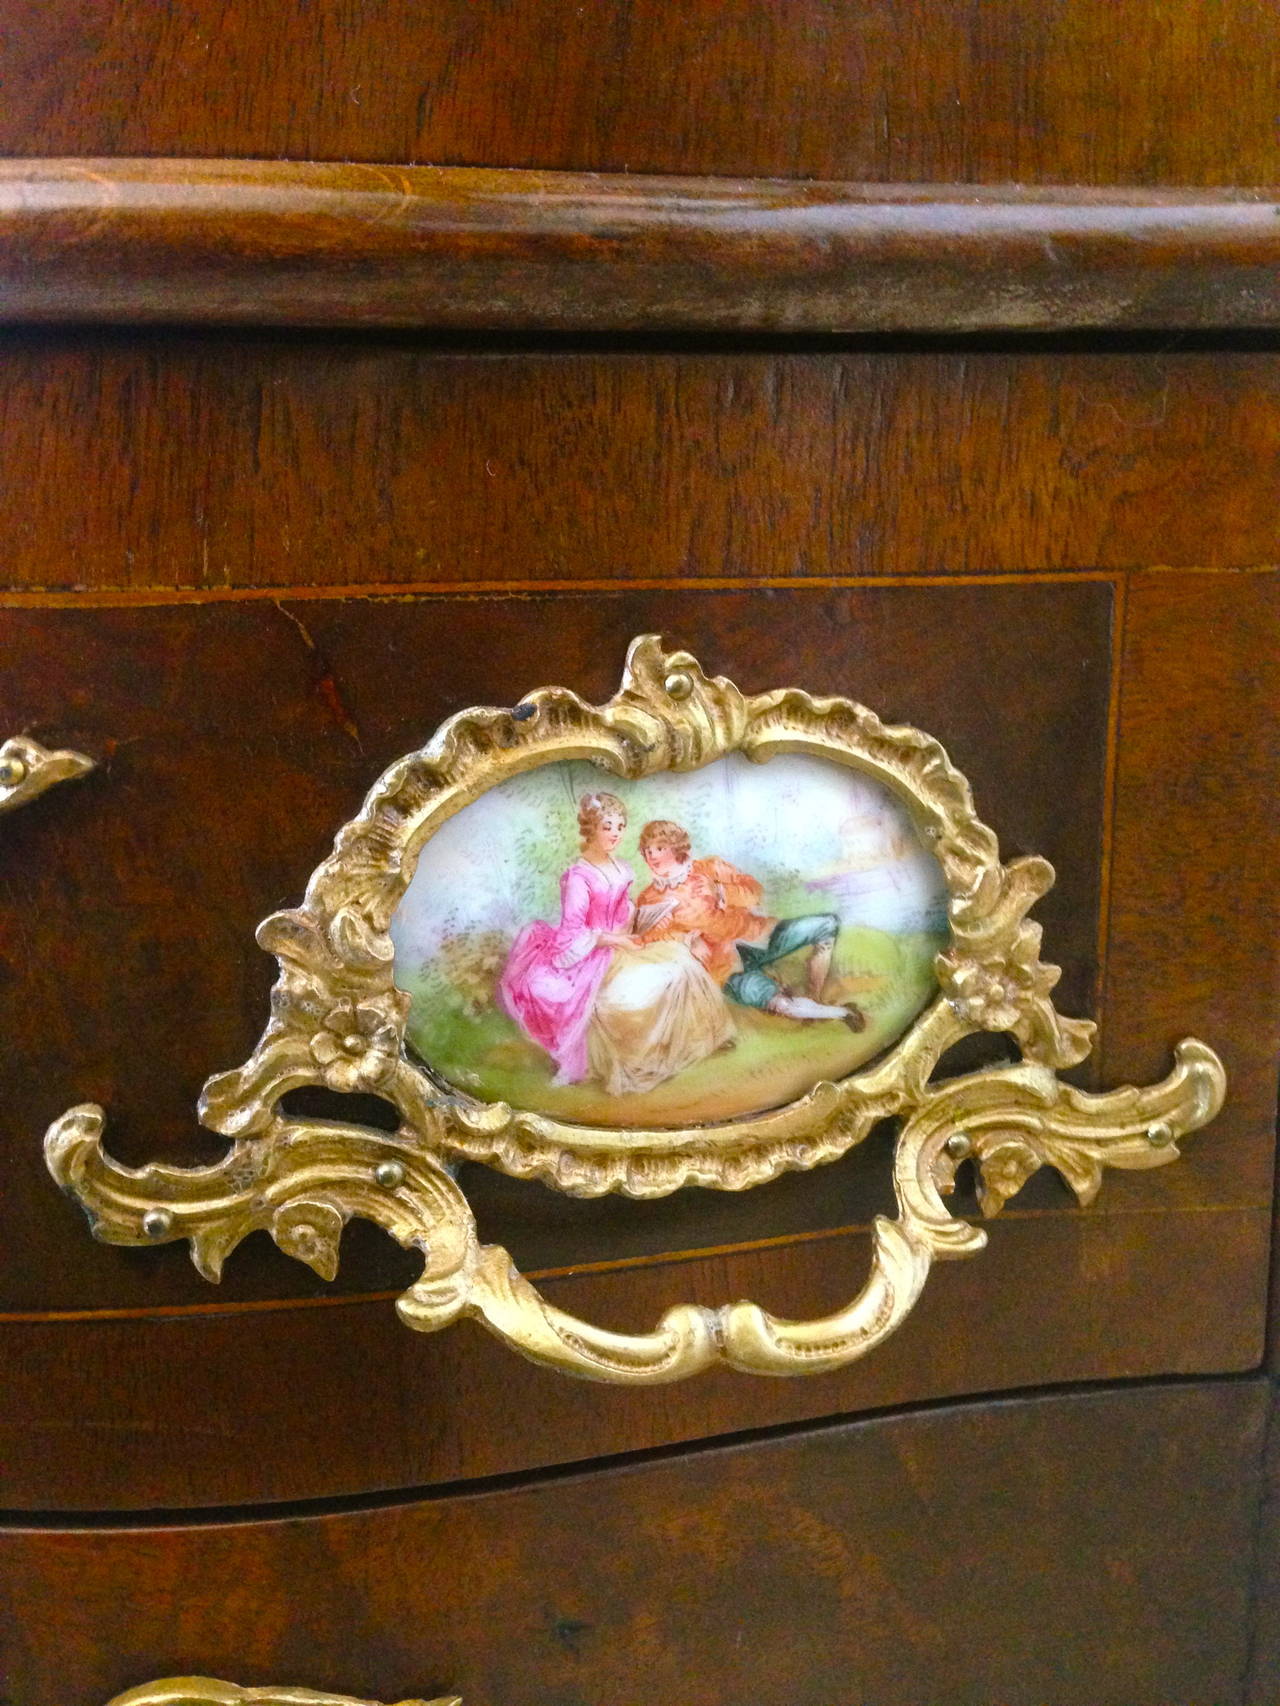 Cast Diminutive 19th Century French Bronze and Porcelain Mounted Cabinet